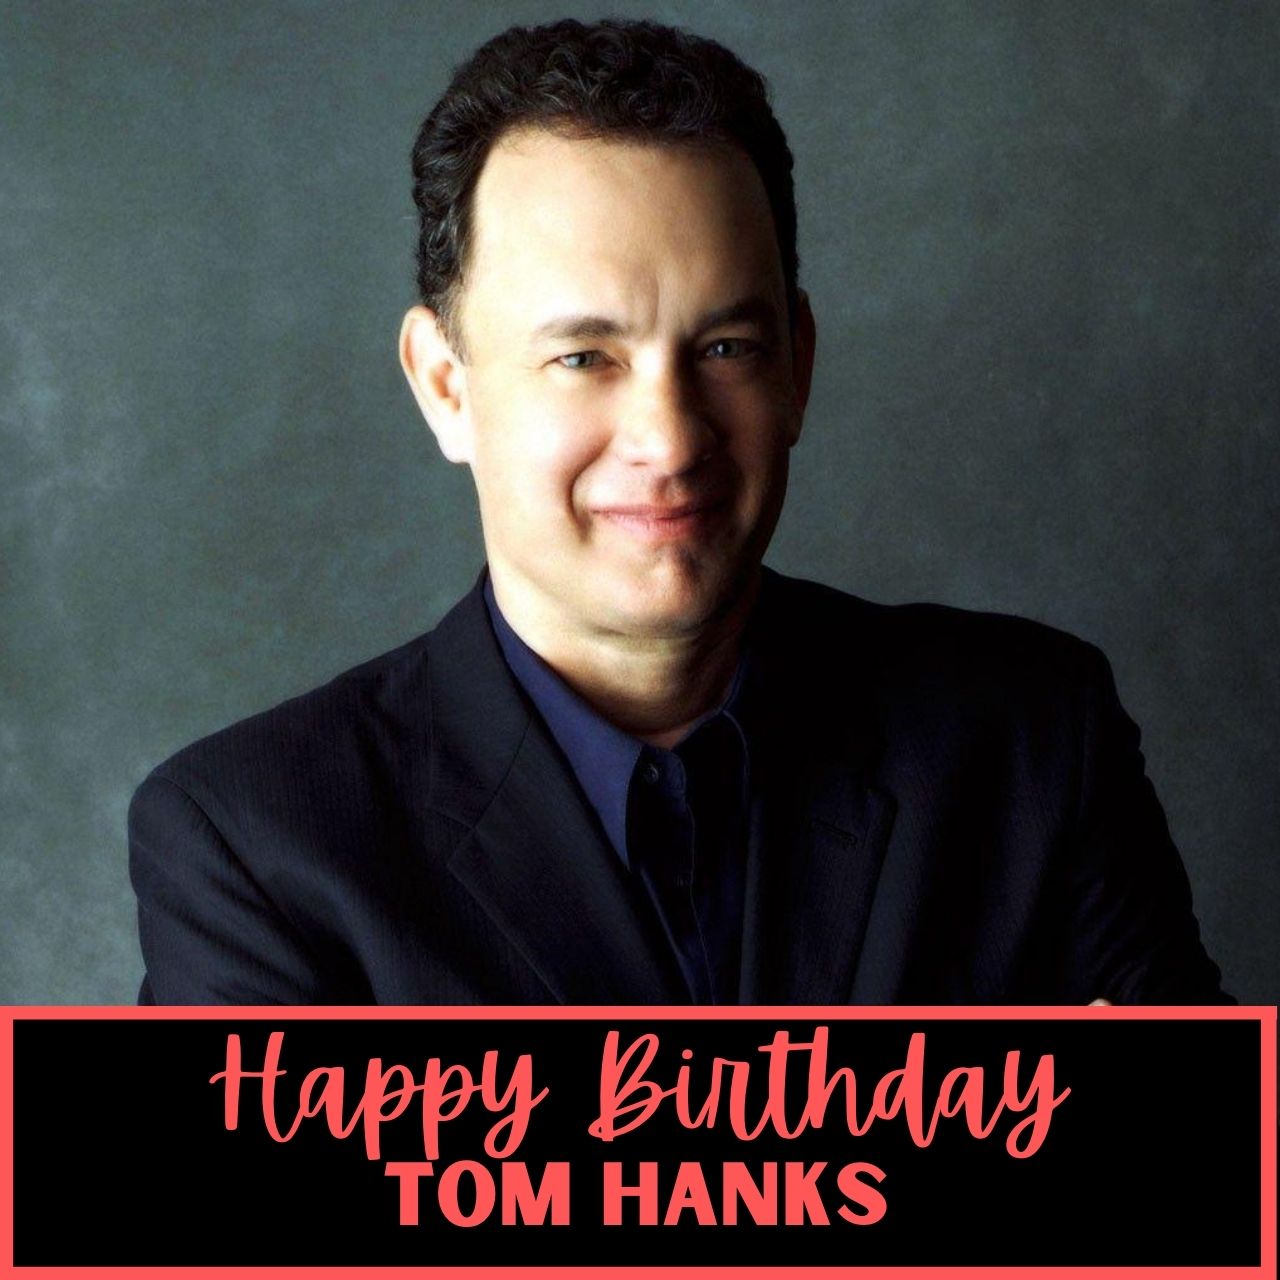 Happy Birthday Tom Hanks: Wishes, Photos (Images), and Video to greet 'Robert Langdon'